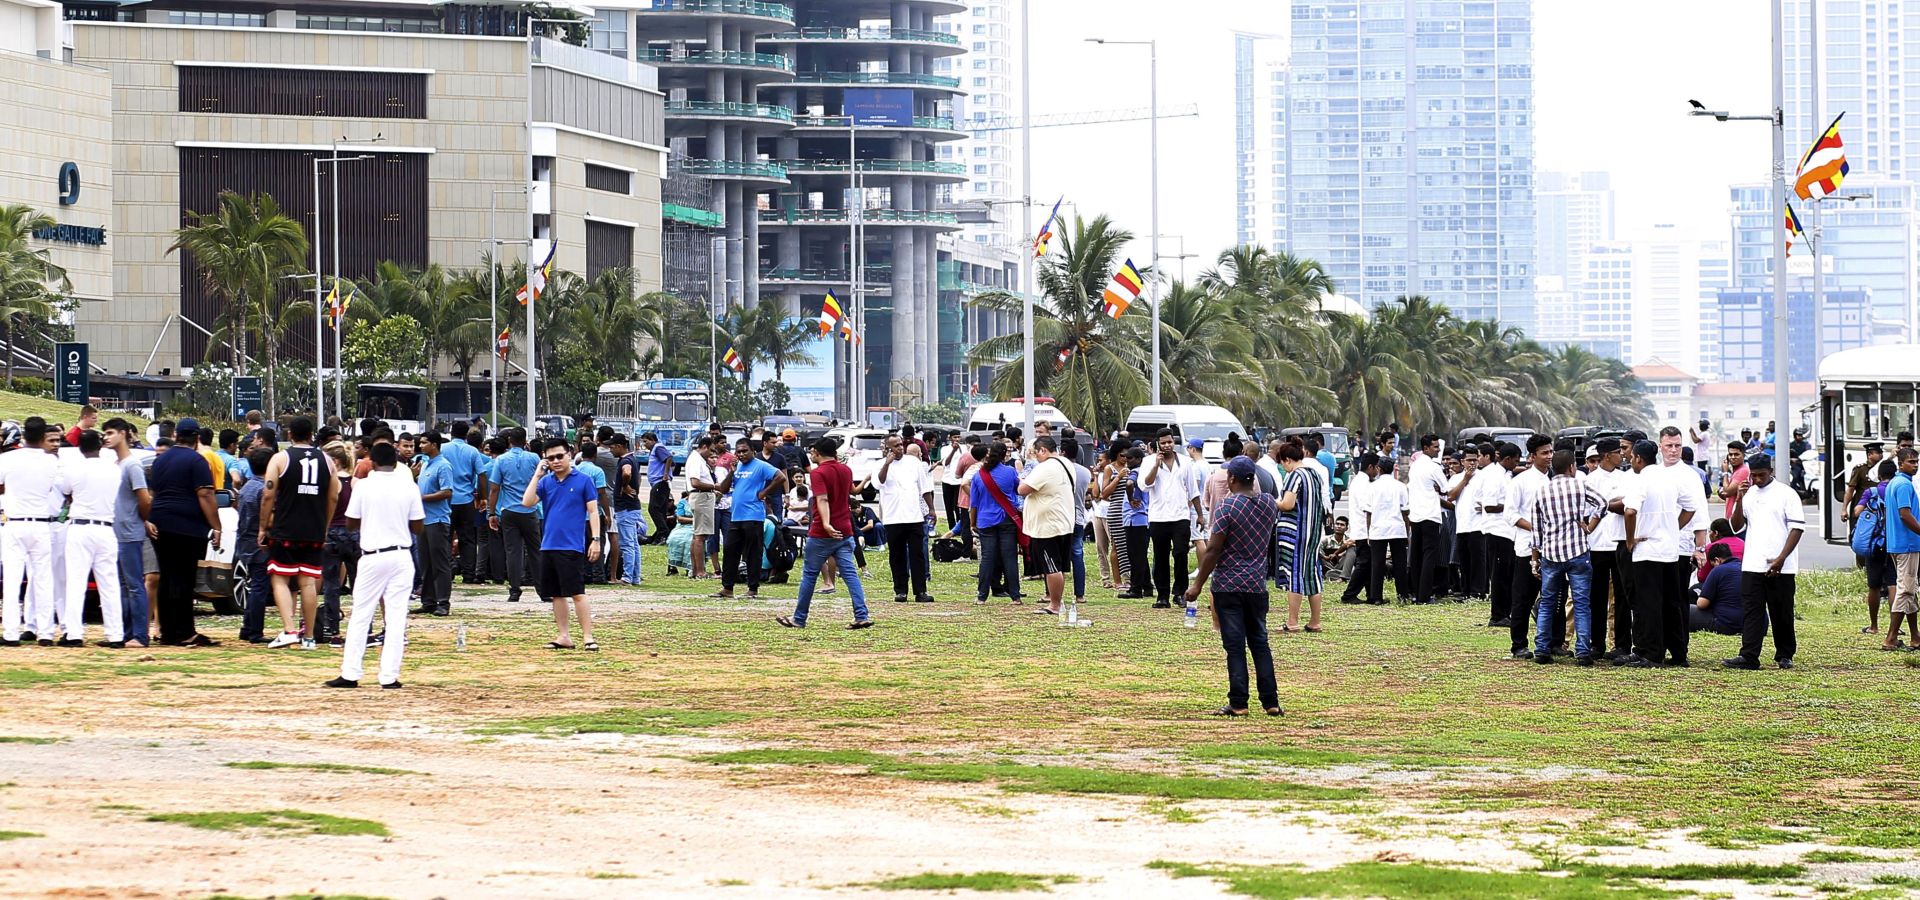 epa07519449 Hotel staffs and guests gather in the open after an explosion hit Shangri-La Hotel  in Colombo, Sri Lanka, 21 April 2019.  According to news reports at least 138 people killed and over 400 injured in a series of blasts during the Easter Sunday service at St Anthony's Church in Kochchikade, Shangri-La Hotel and Kingsbury Hotel with many more places.  EPA/M.A. PUSHPA KUMARA